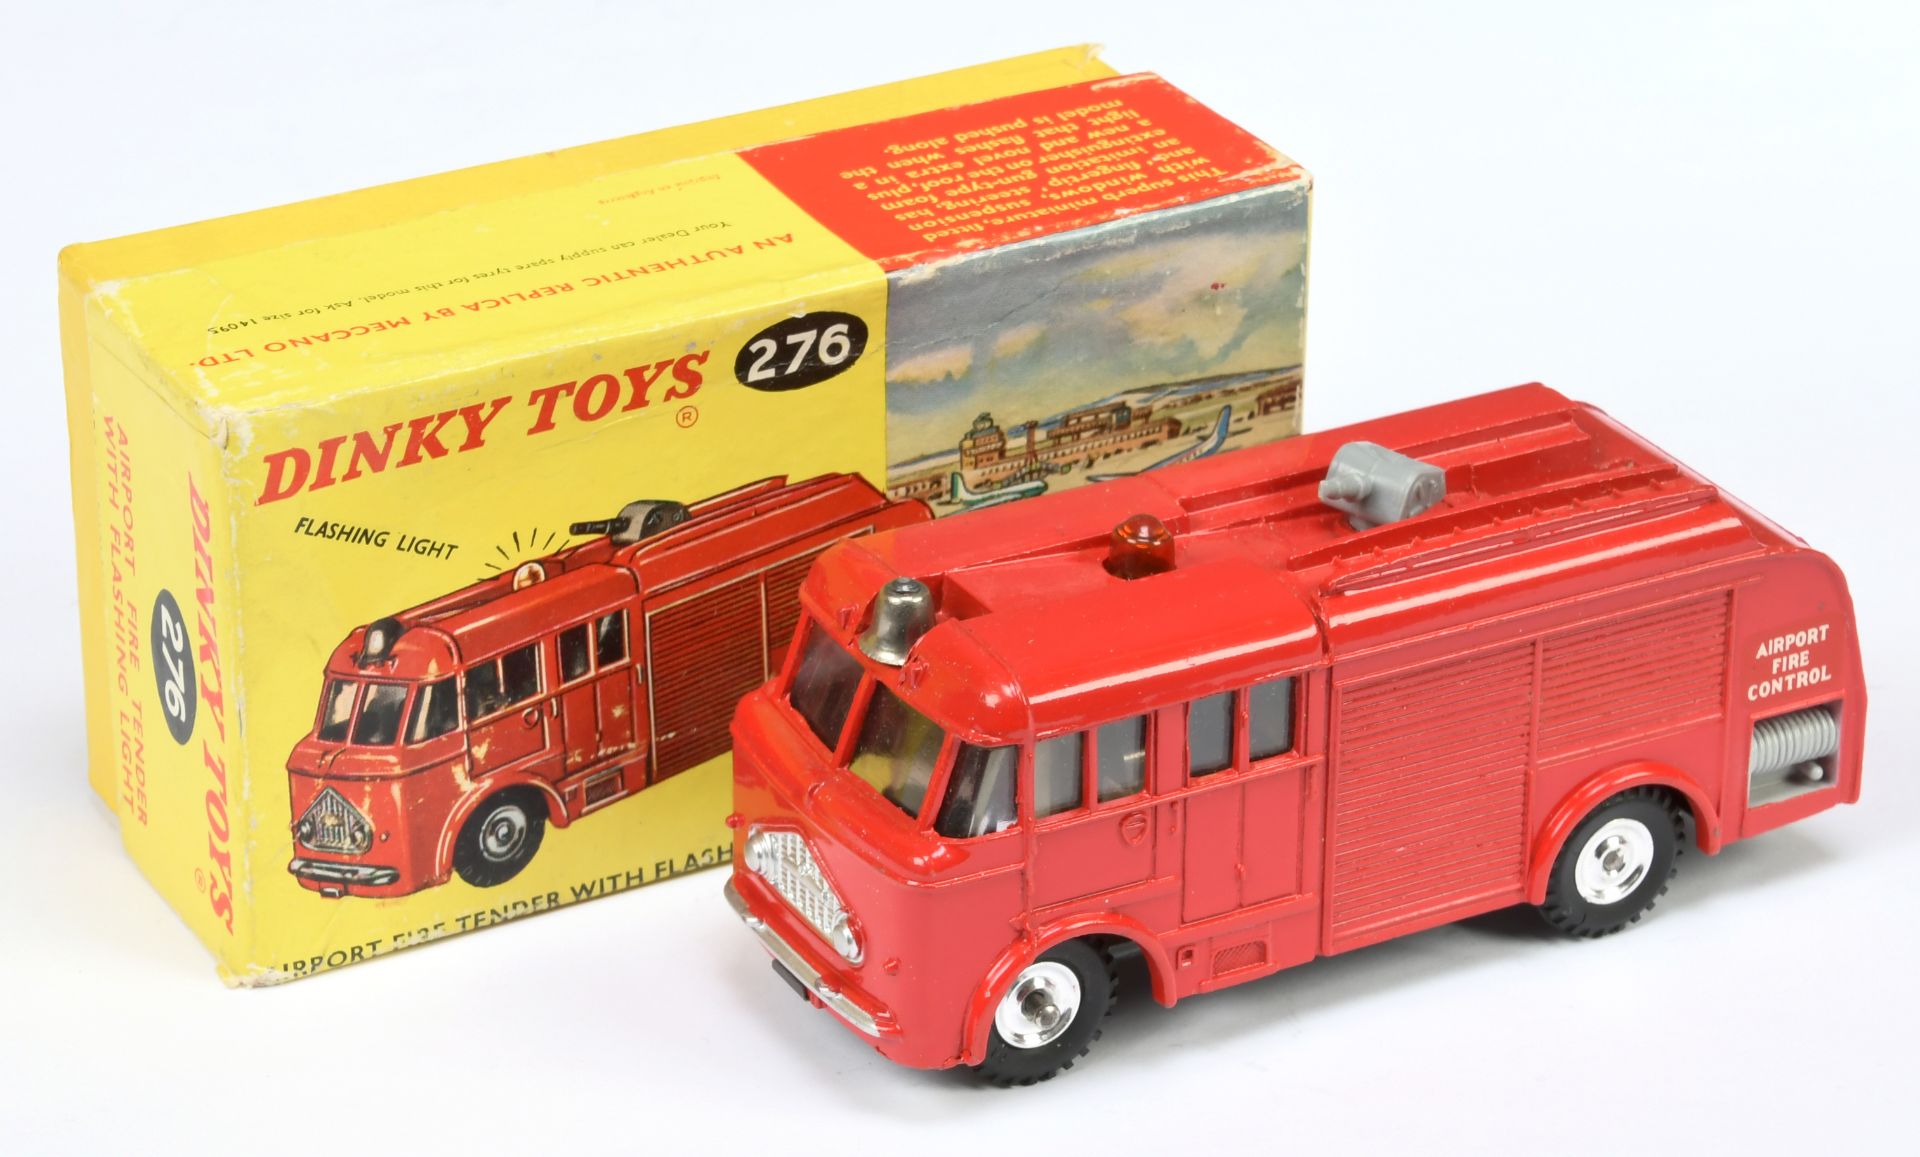 Dinky Toys 276 Airport Fire Engine - Red body, silver trim, grey plastic nozzle, bell, amber batt...